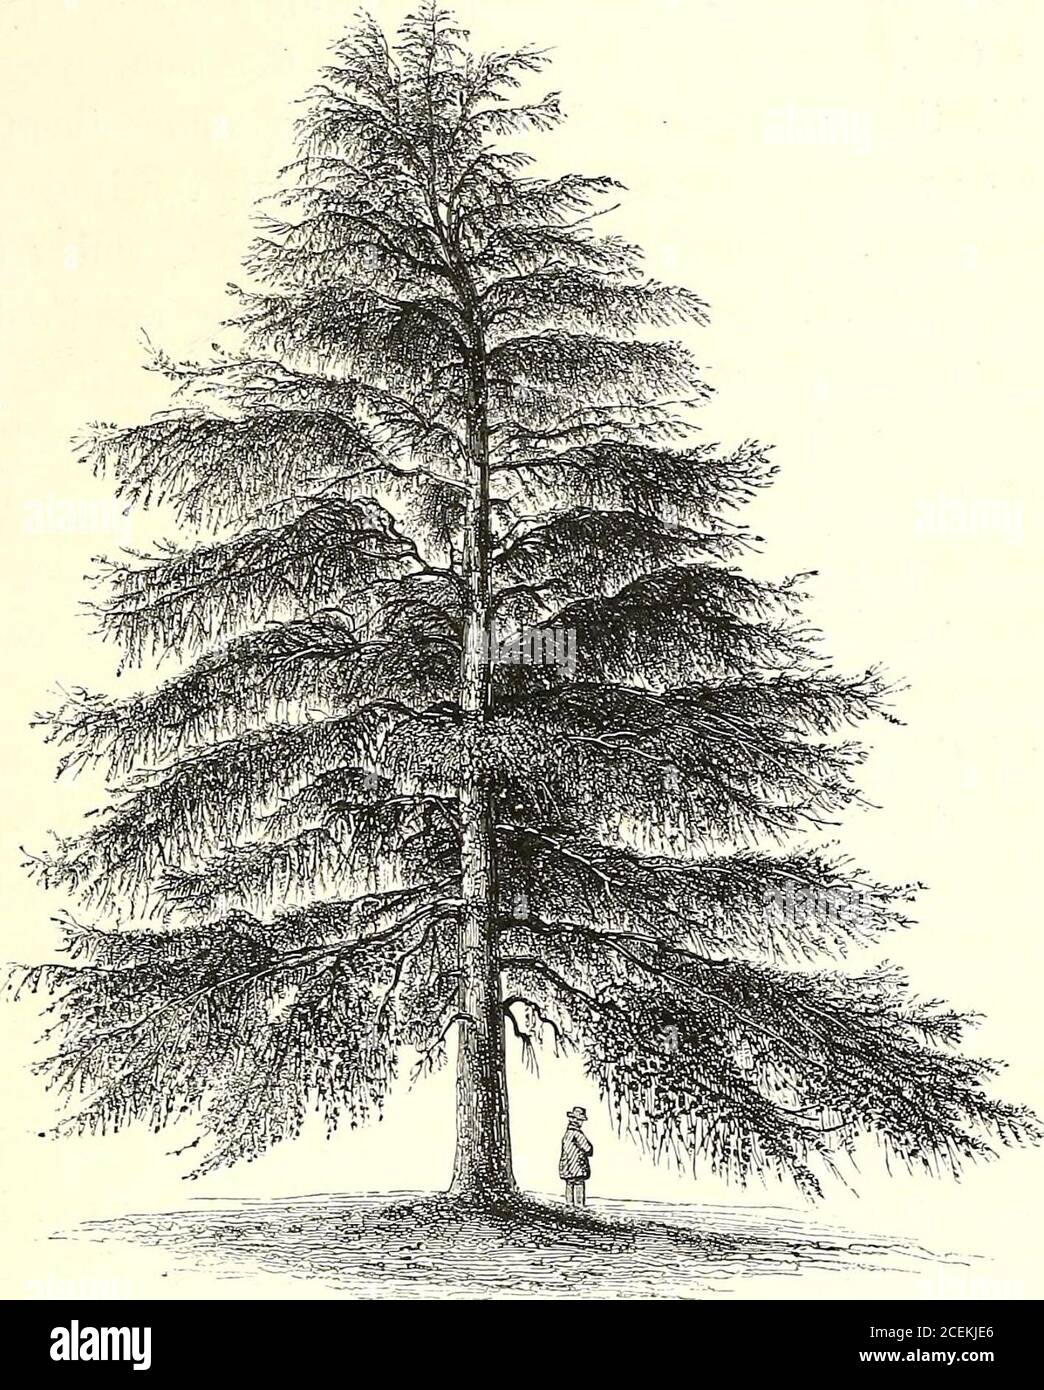 . A history of British forest-trees, indigenous and introduced. OLD SCOTCH FIR. THE COMMON LARCH. 483. Genus La?-iv, To urn. Linn. Syst. MonaciaMonodelphia. Larix Europcea. Dec an.THE COMMON LAECH. Larix Eurapoea,Pinus Larix, Decan. Flor. Fran. No. 2064.Loudons Arb. Brit. ch. cxiii. p. 2350Linn. Syl. pi. 1420.Hunters Evel. Sylv. p. 269.Ait. Hort. Kew. p. 369.Lamb. Pen. t. 48. 2 i 2 484 CONIFEB.E. The members of the genus Larix are distinguished fromthe rest of the Abietina by being deciduous, that is, theylose their leaves in the autumn of the same year inwhich they are produced, instead of re Stock Photo